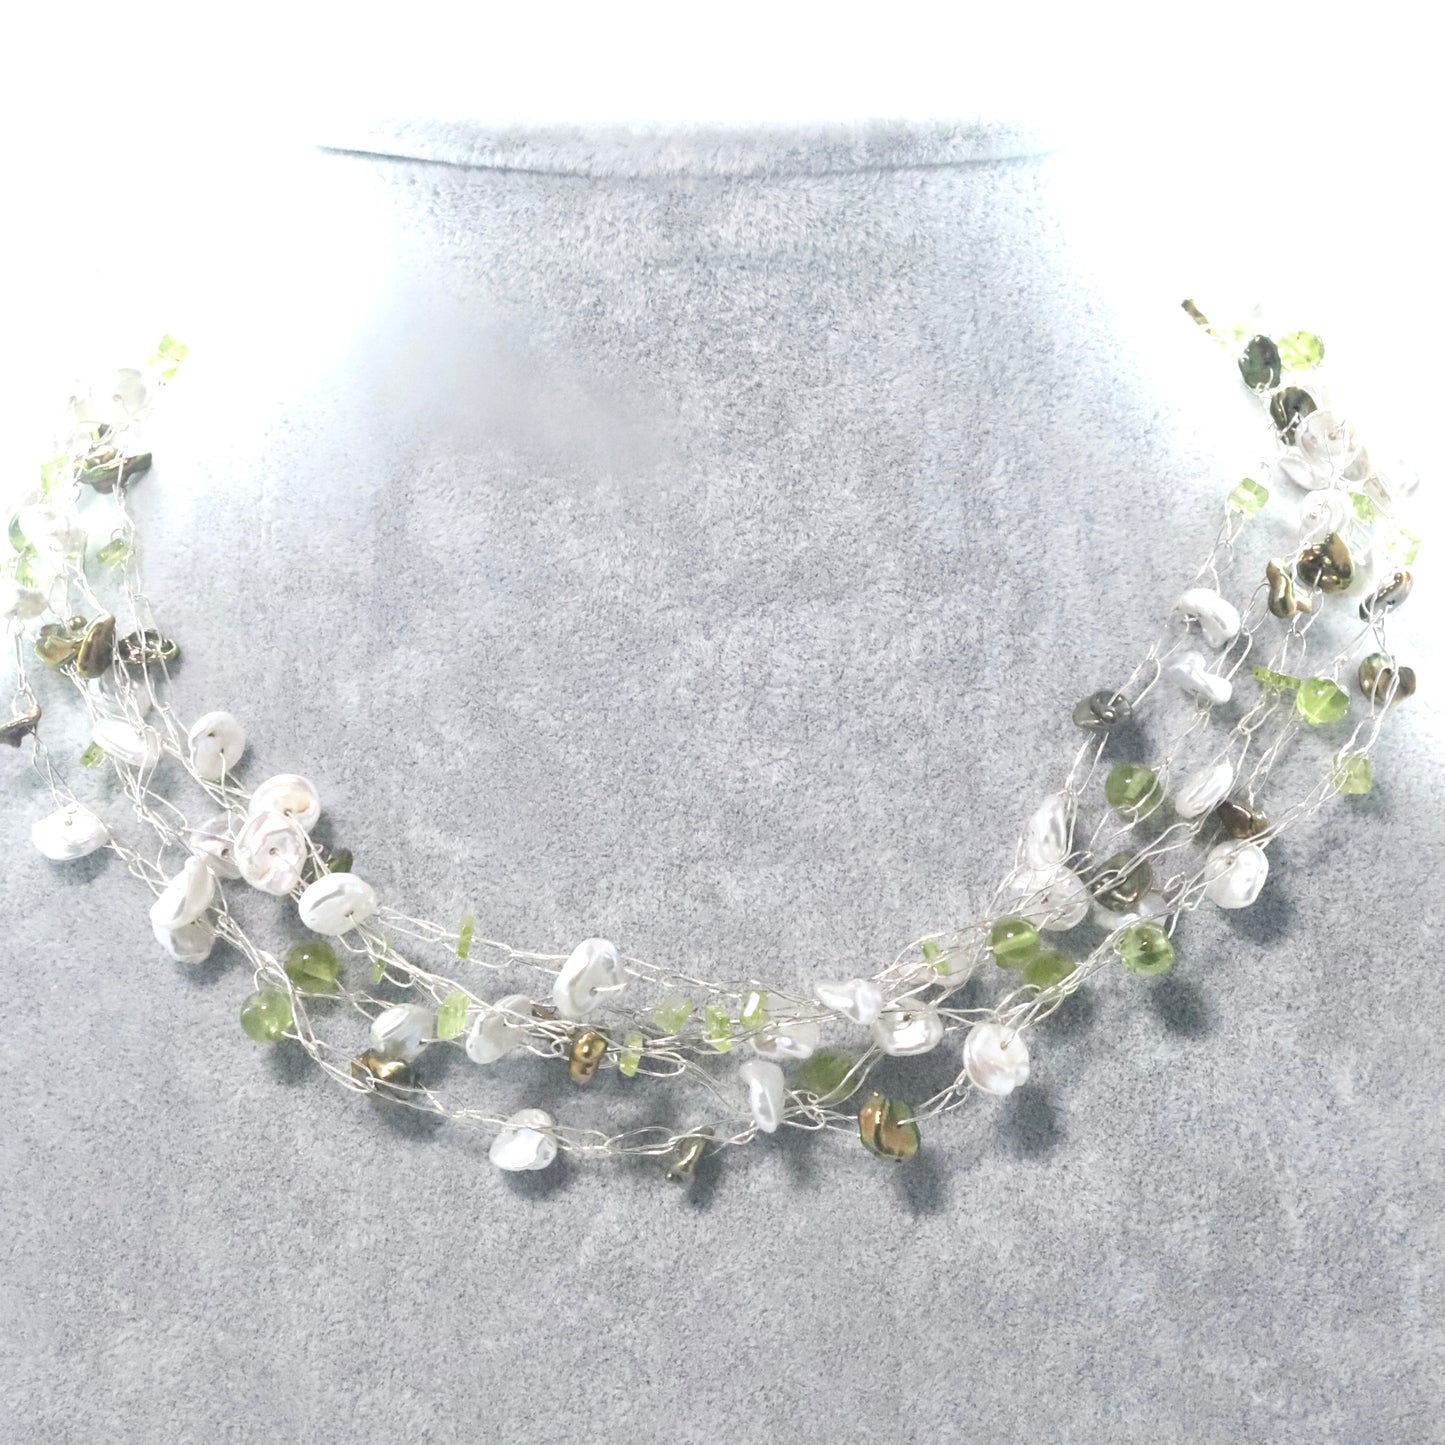 Freshwater pearls with a touch of green multi-strand necklace